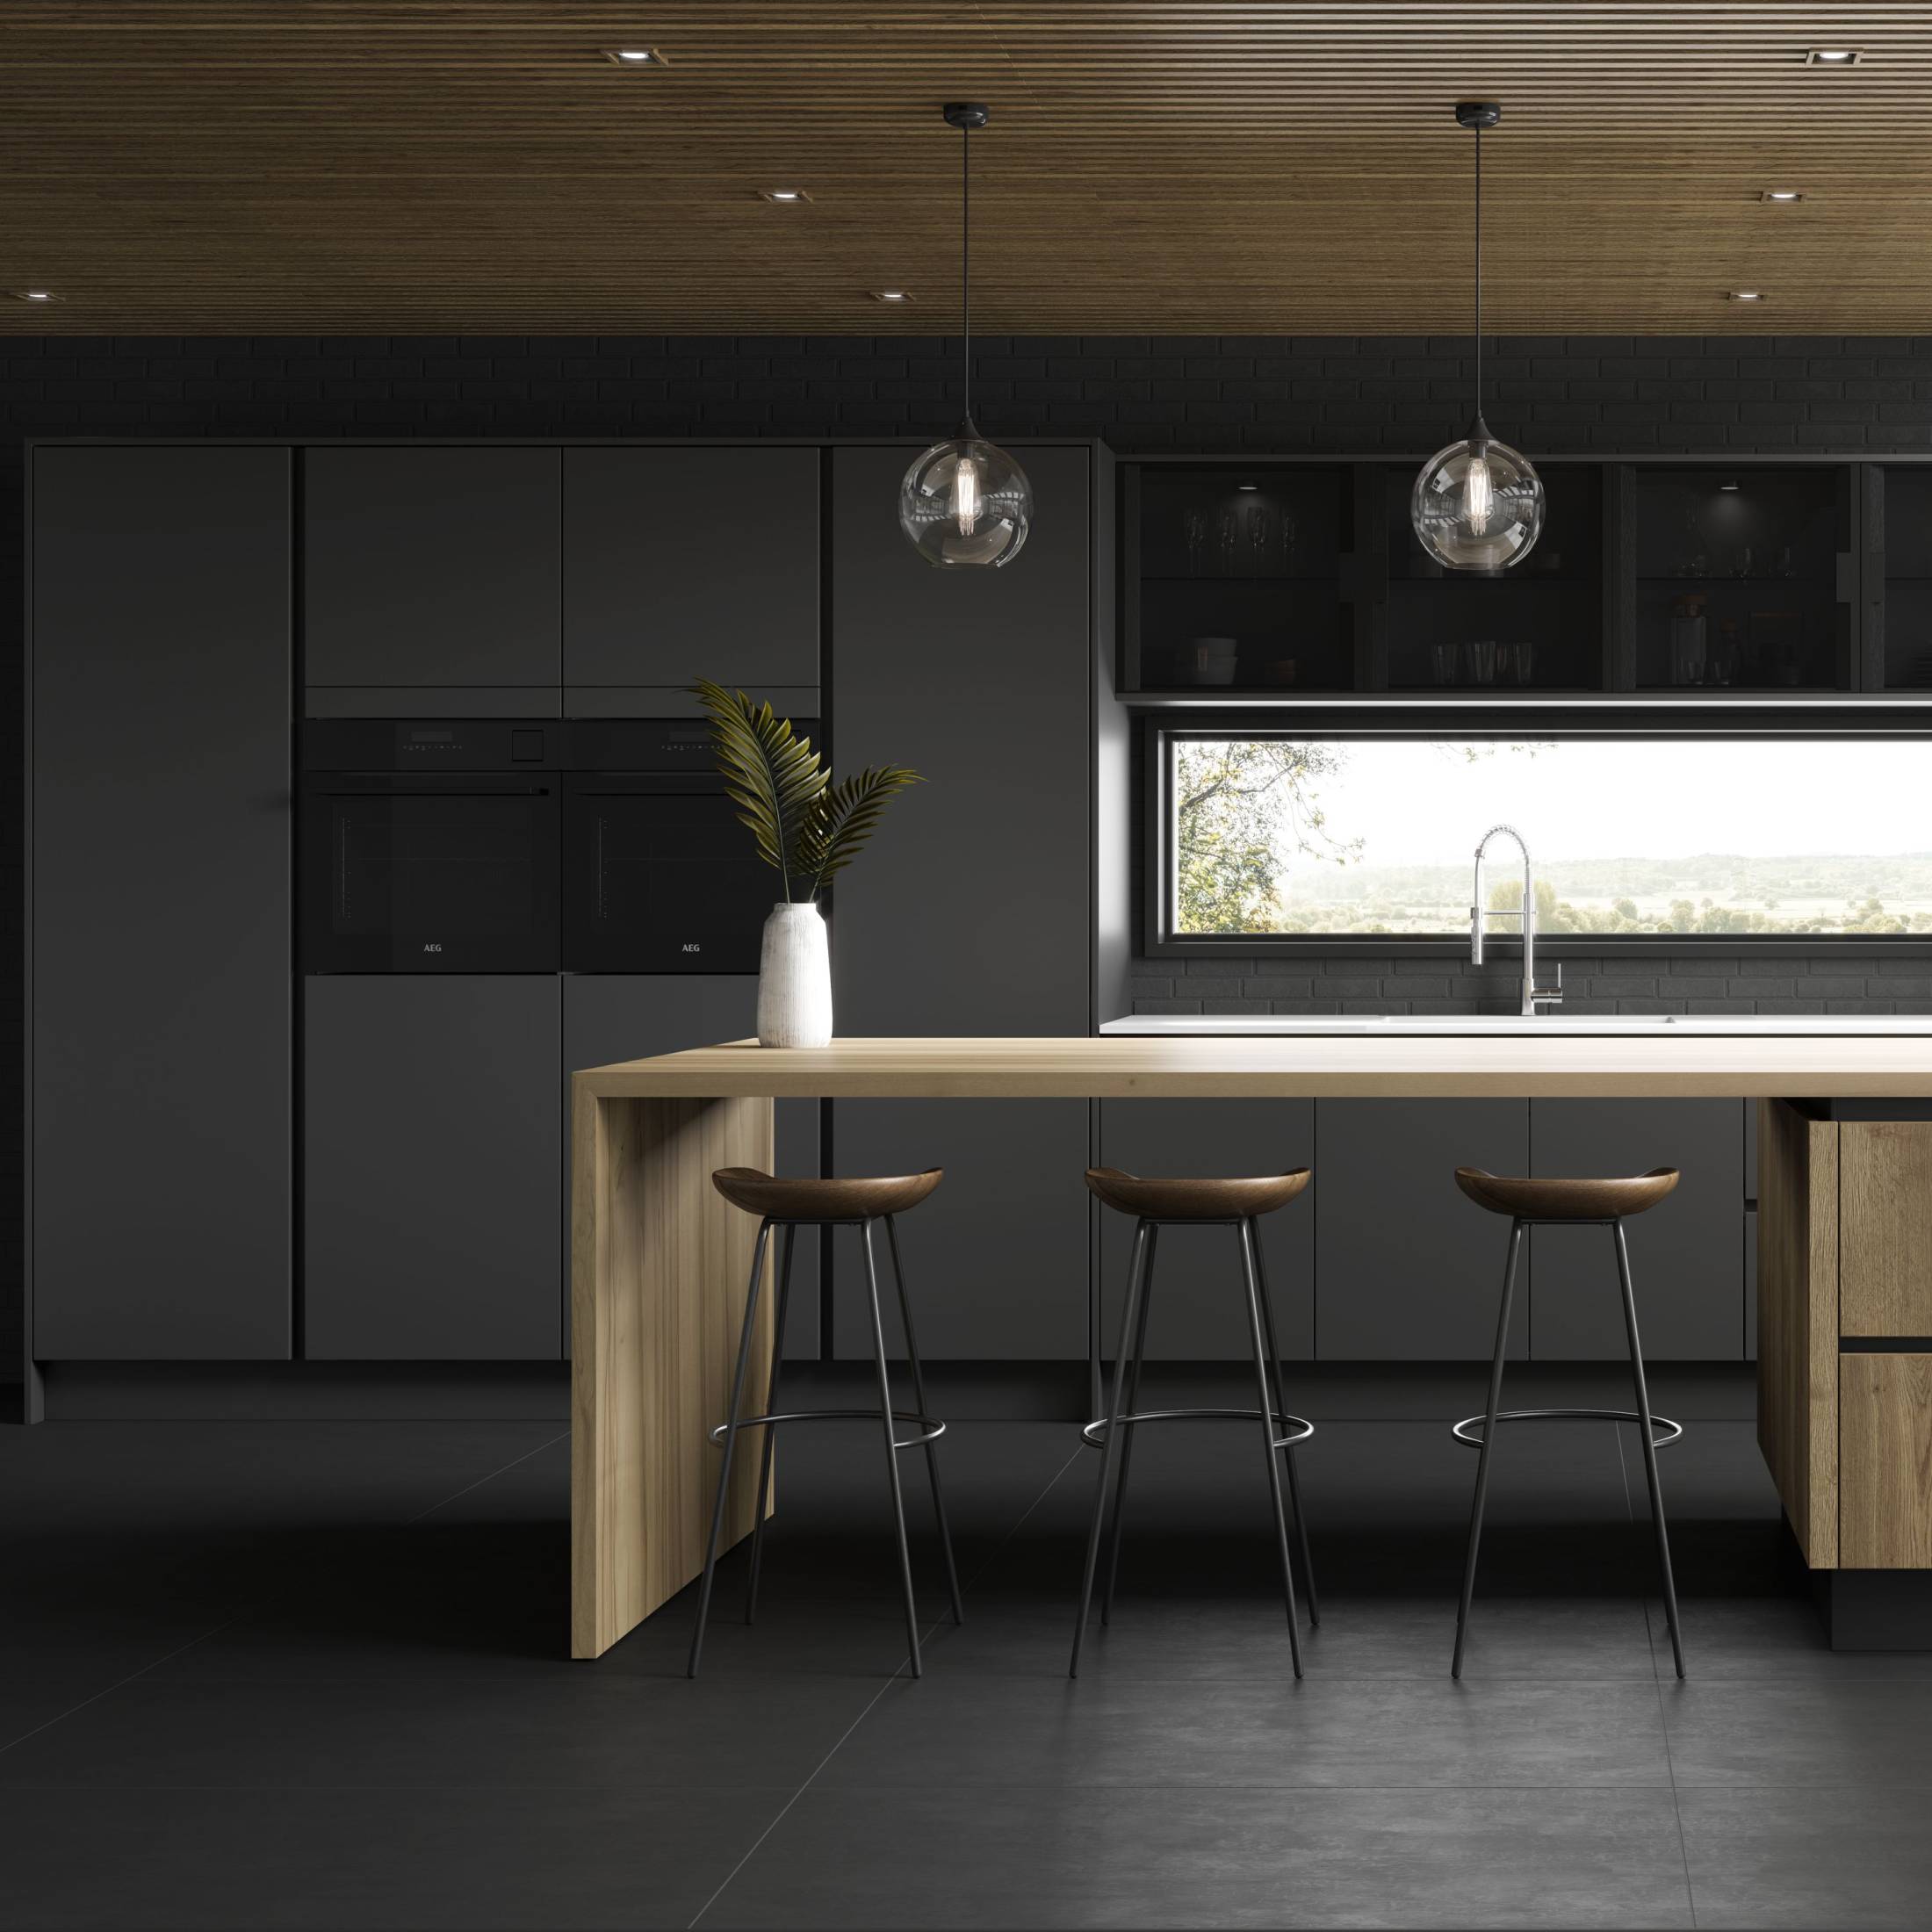 Linear Trend | Kitchens by Emma Reed